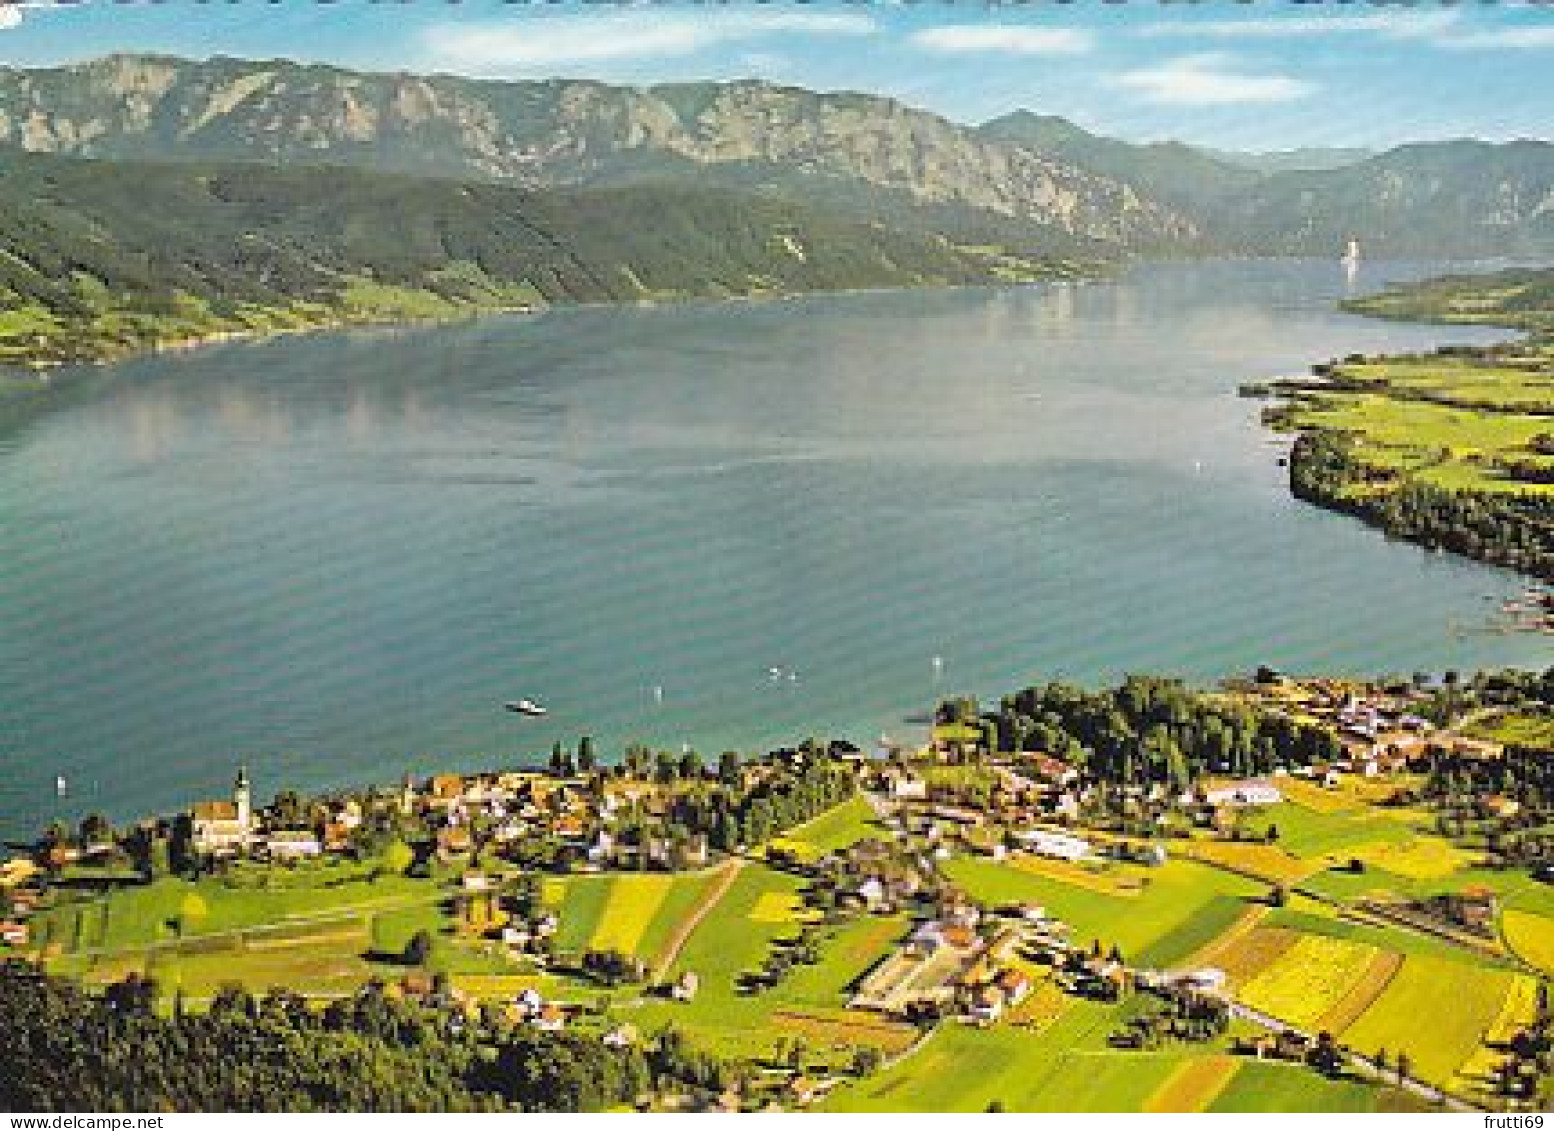 AK 189196 AUSTRIA - Attersee - Attersee-Orte